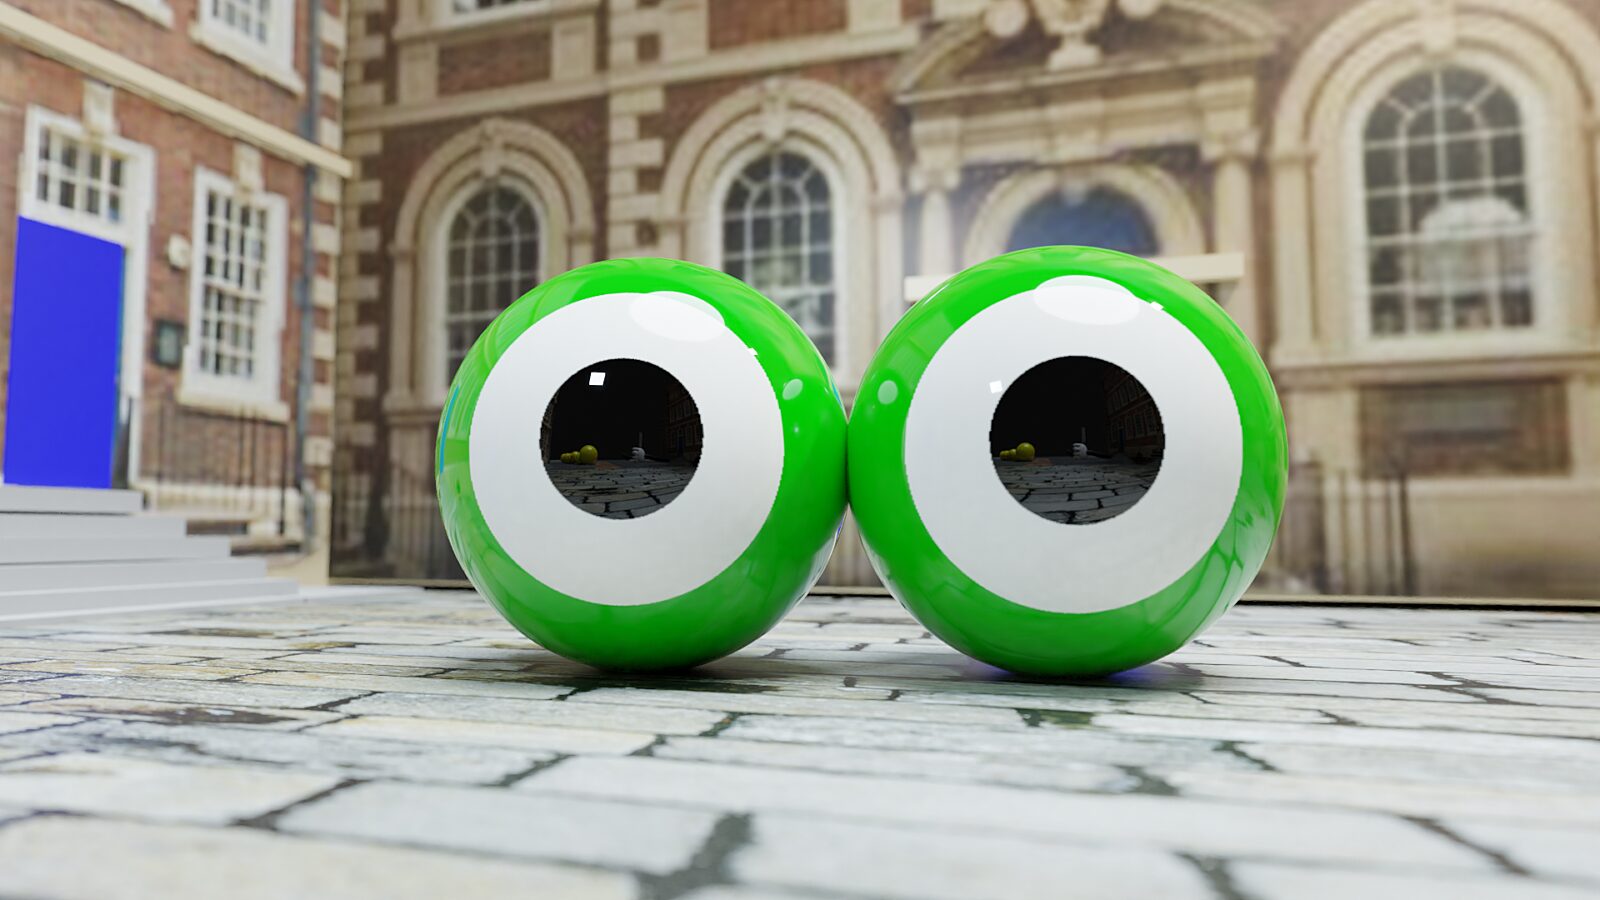 A concept sketch for Bruce Asbestos' project 'OK! Cherub!'. This image shows a giant inflatable pair of green frogspawn, located in front of the Bluecoat building.